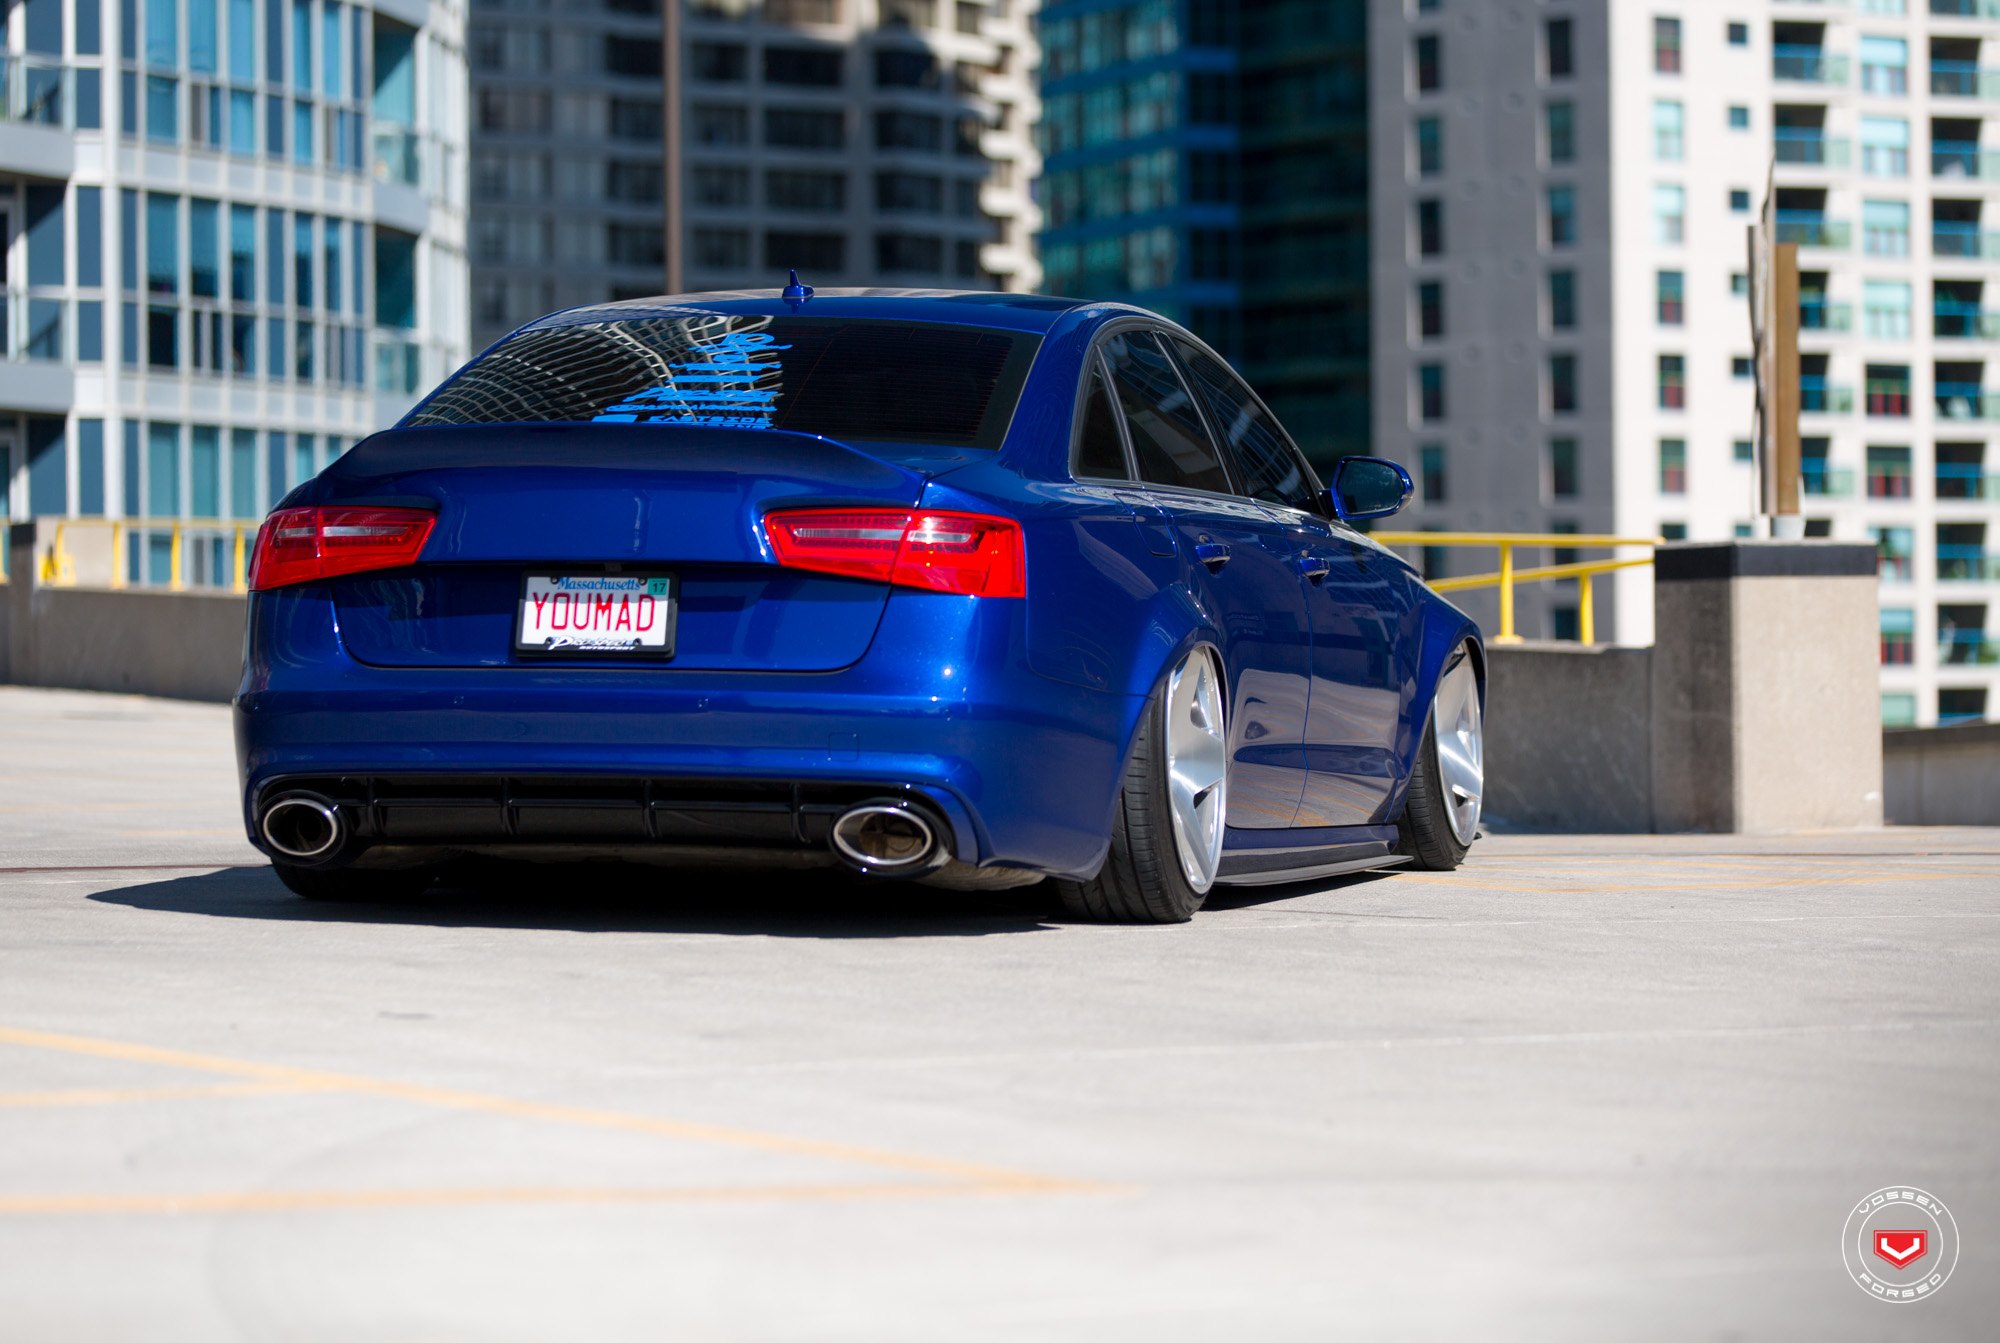 Audi A6 with Aftermarket Rear Diffuser - Photo by Vossen